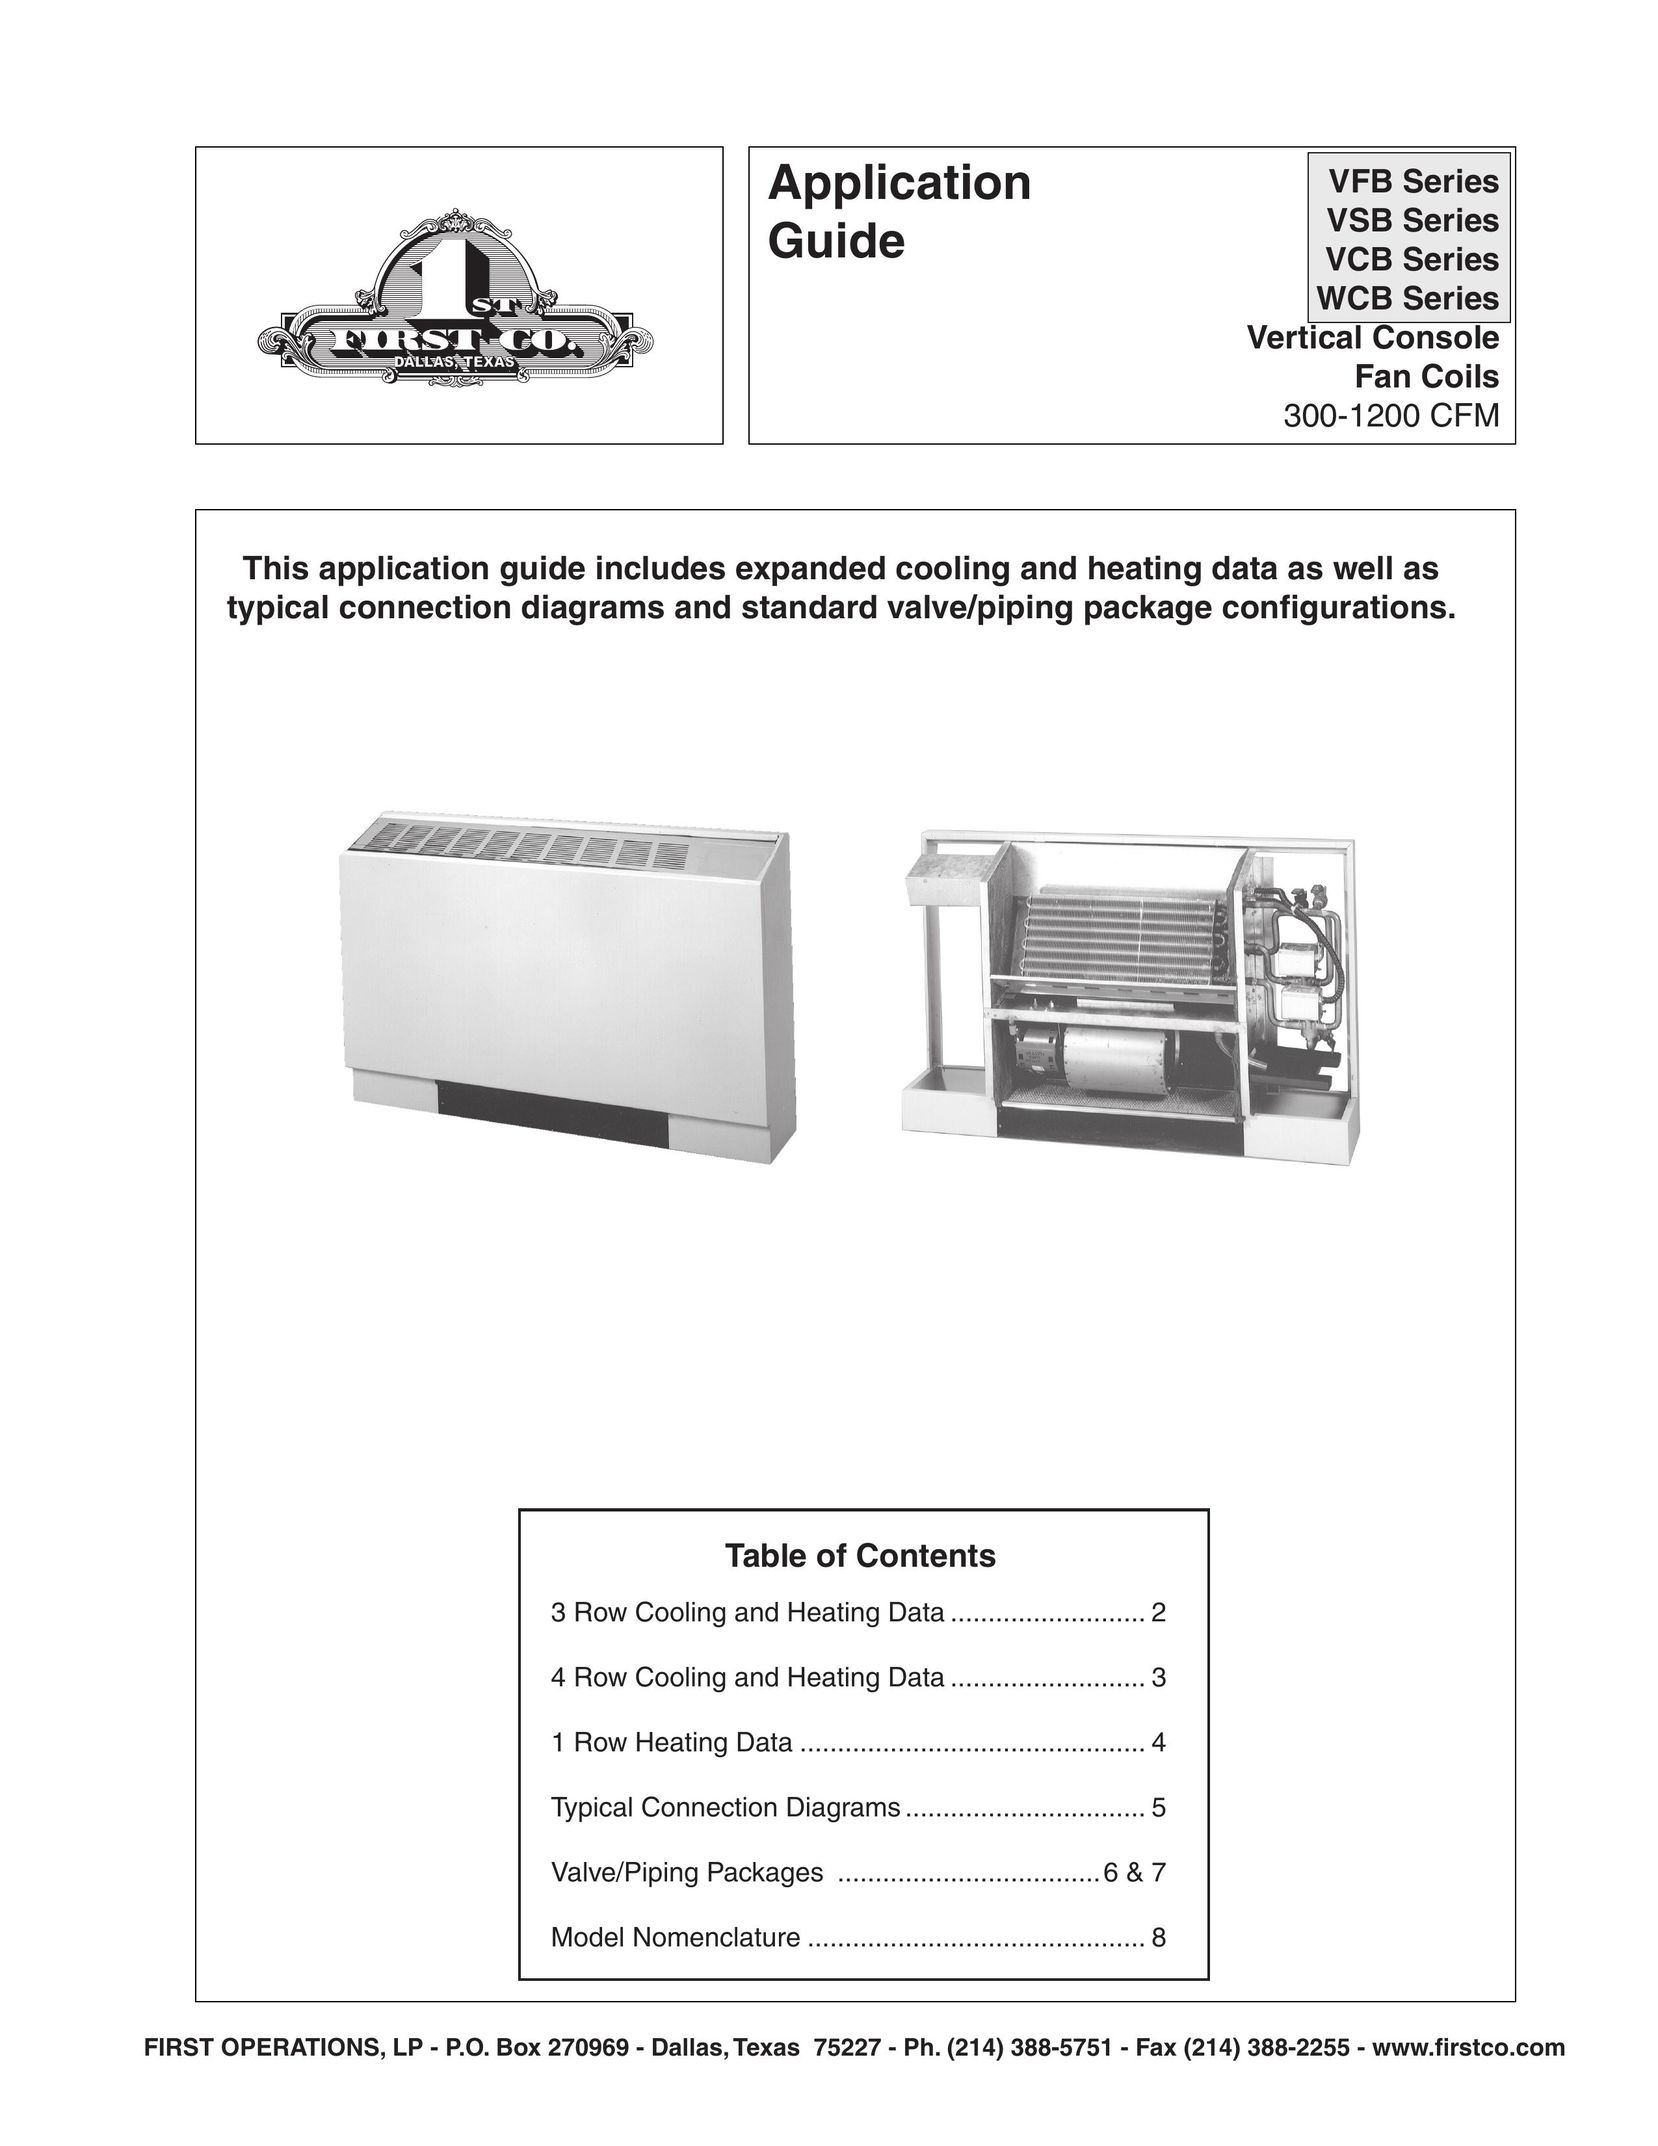 First Operations 300-1200 CFM Air Conditioner User Manual